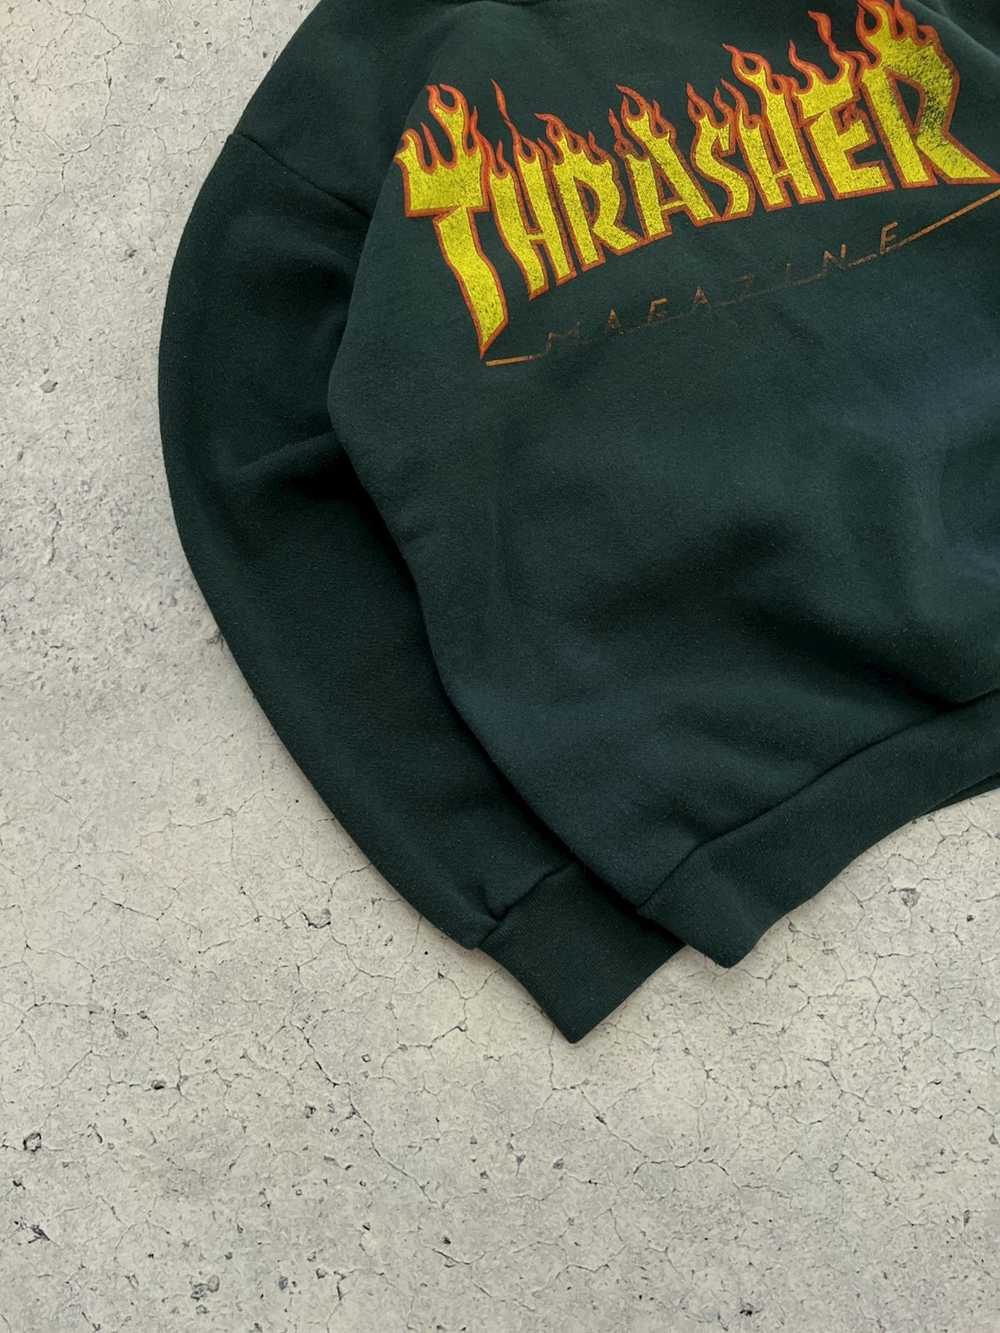 Made In Usa × Thrasher × Vintage ❗️VERY RARE❗️ TH… - image 2